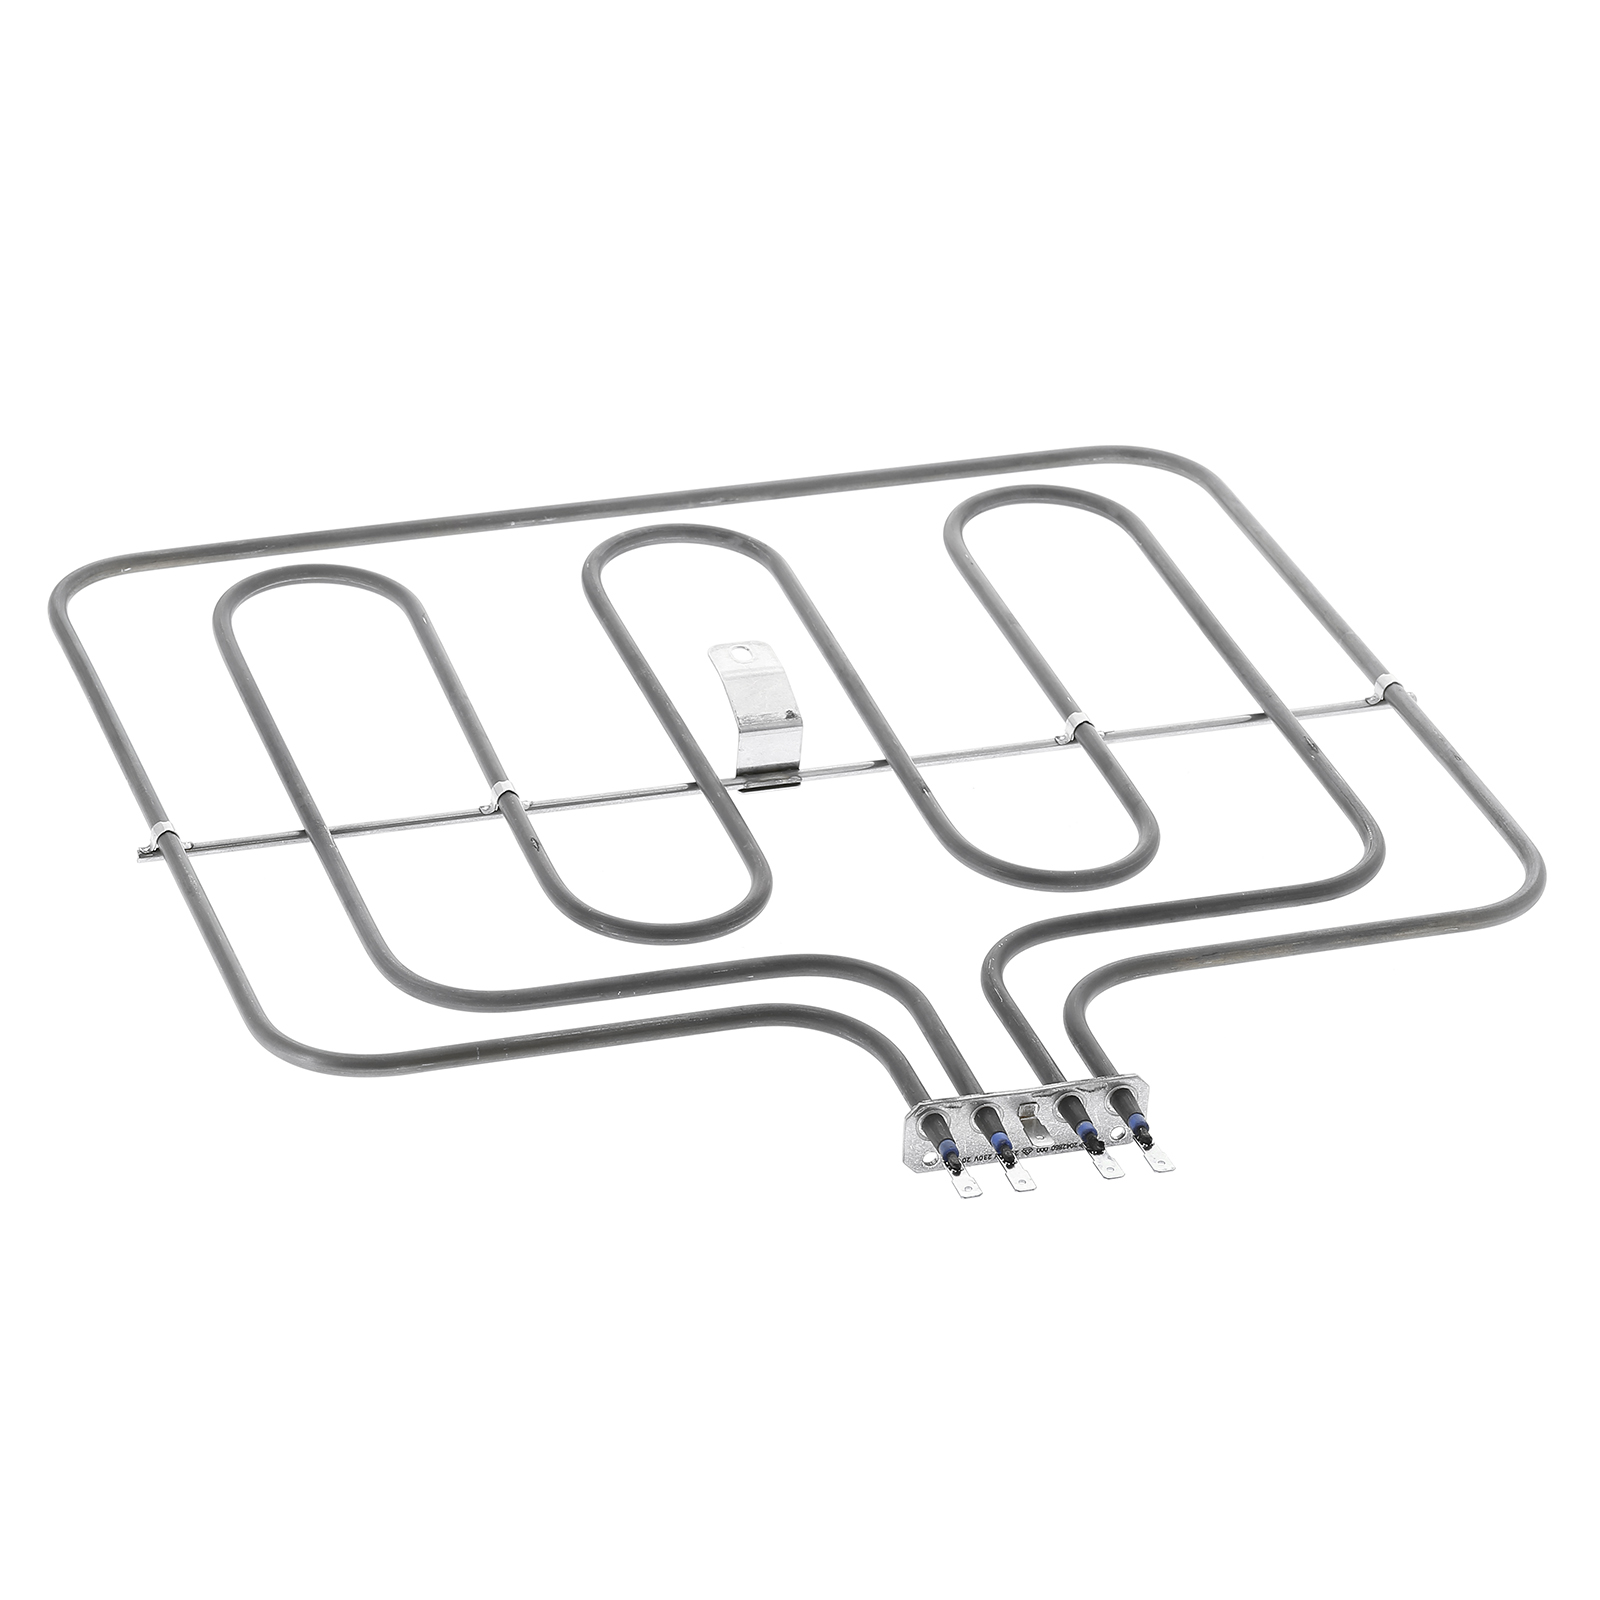 Bush Cooker Top Oven Dual Grill Element - 2600W 32043684